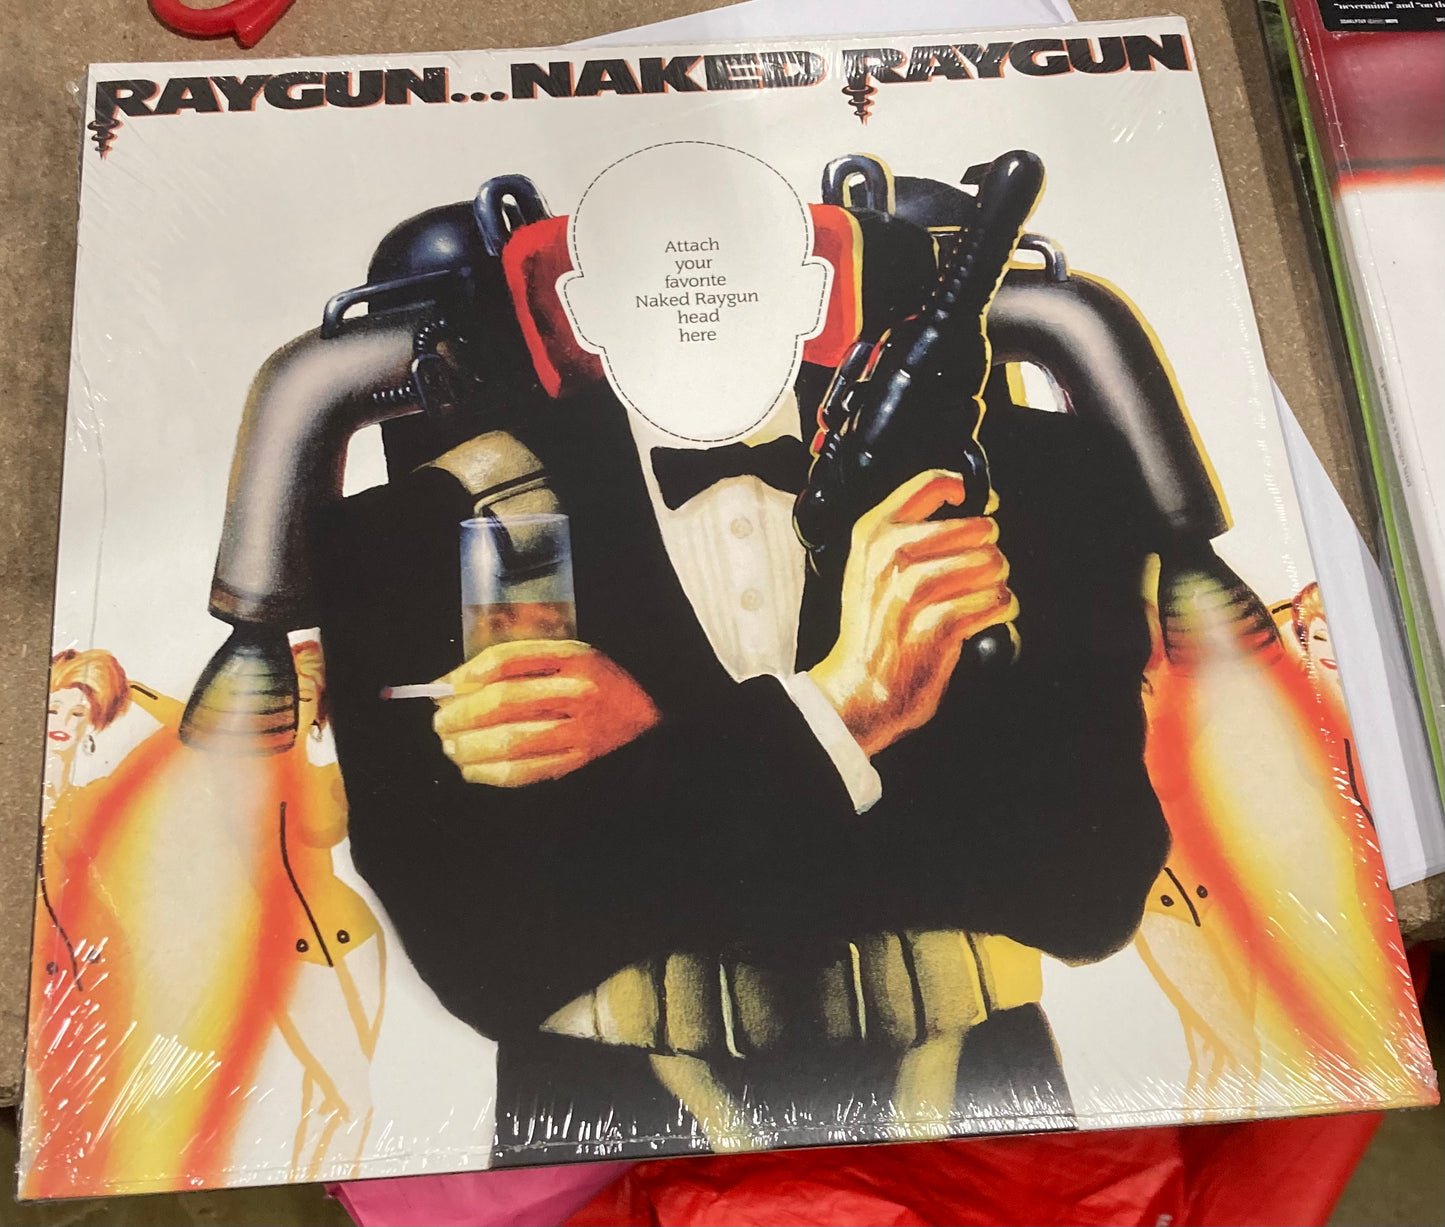 The Front of 'Naked Raygun - Raygun Naked Raygun' on vinyl